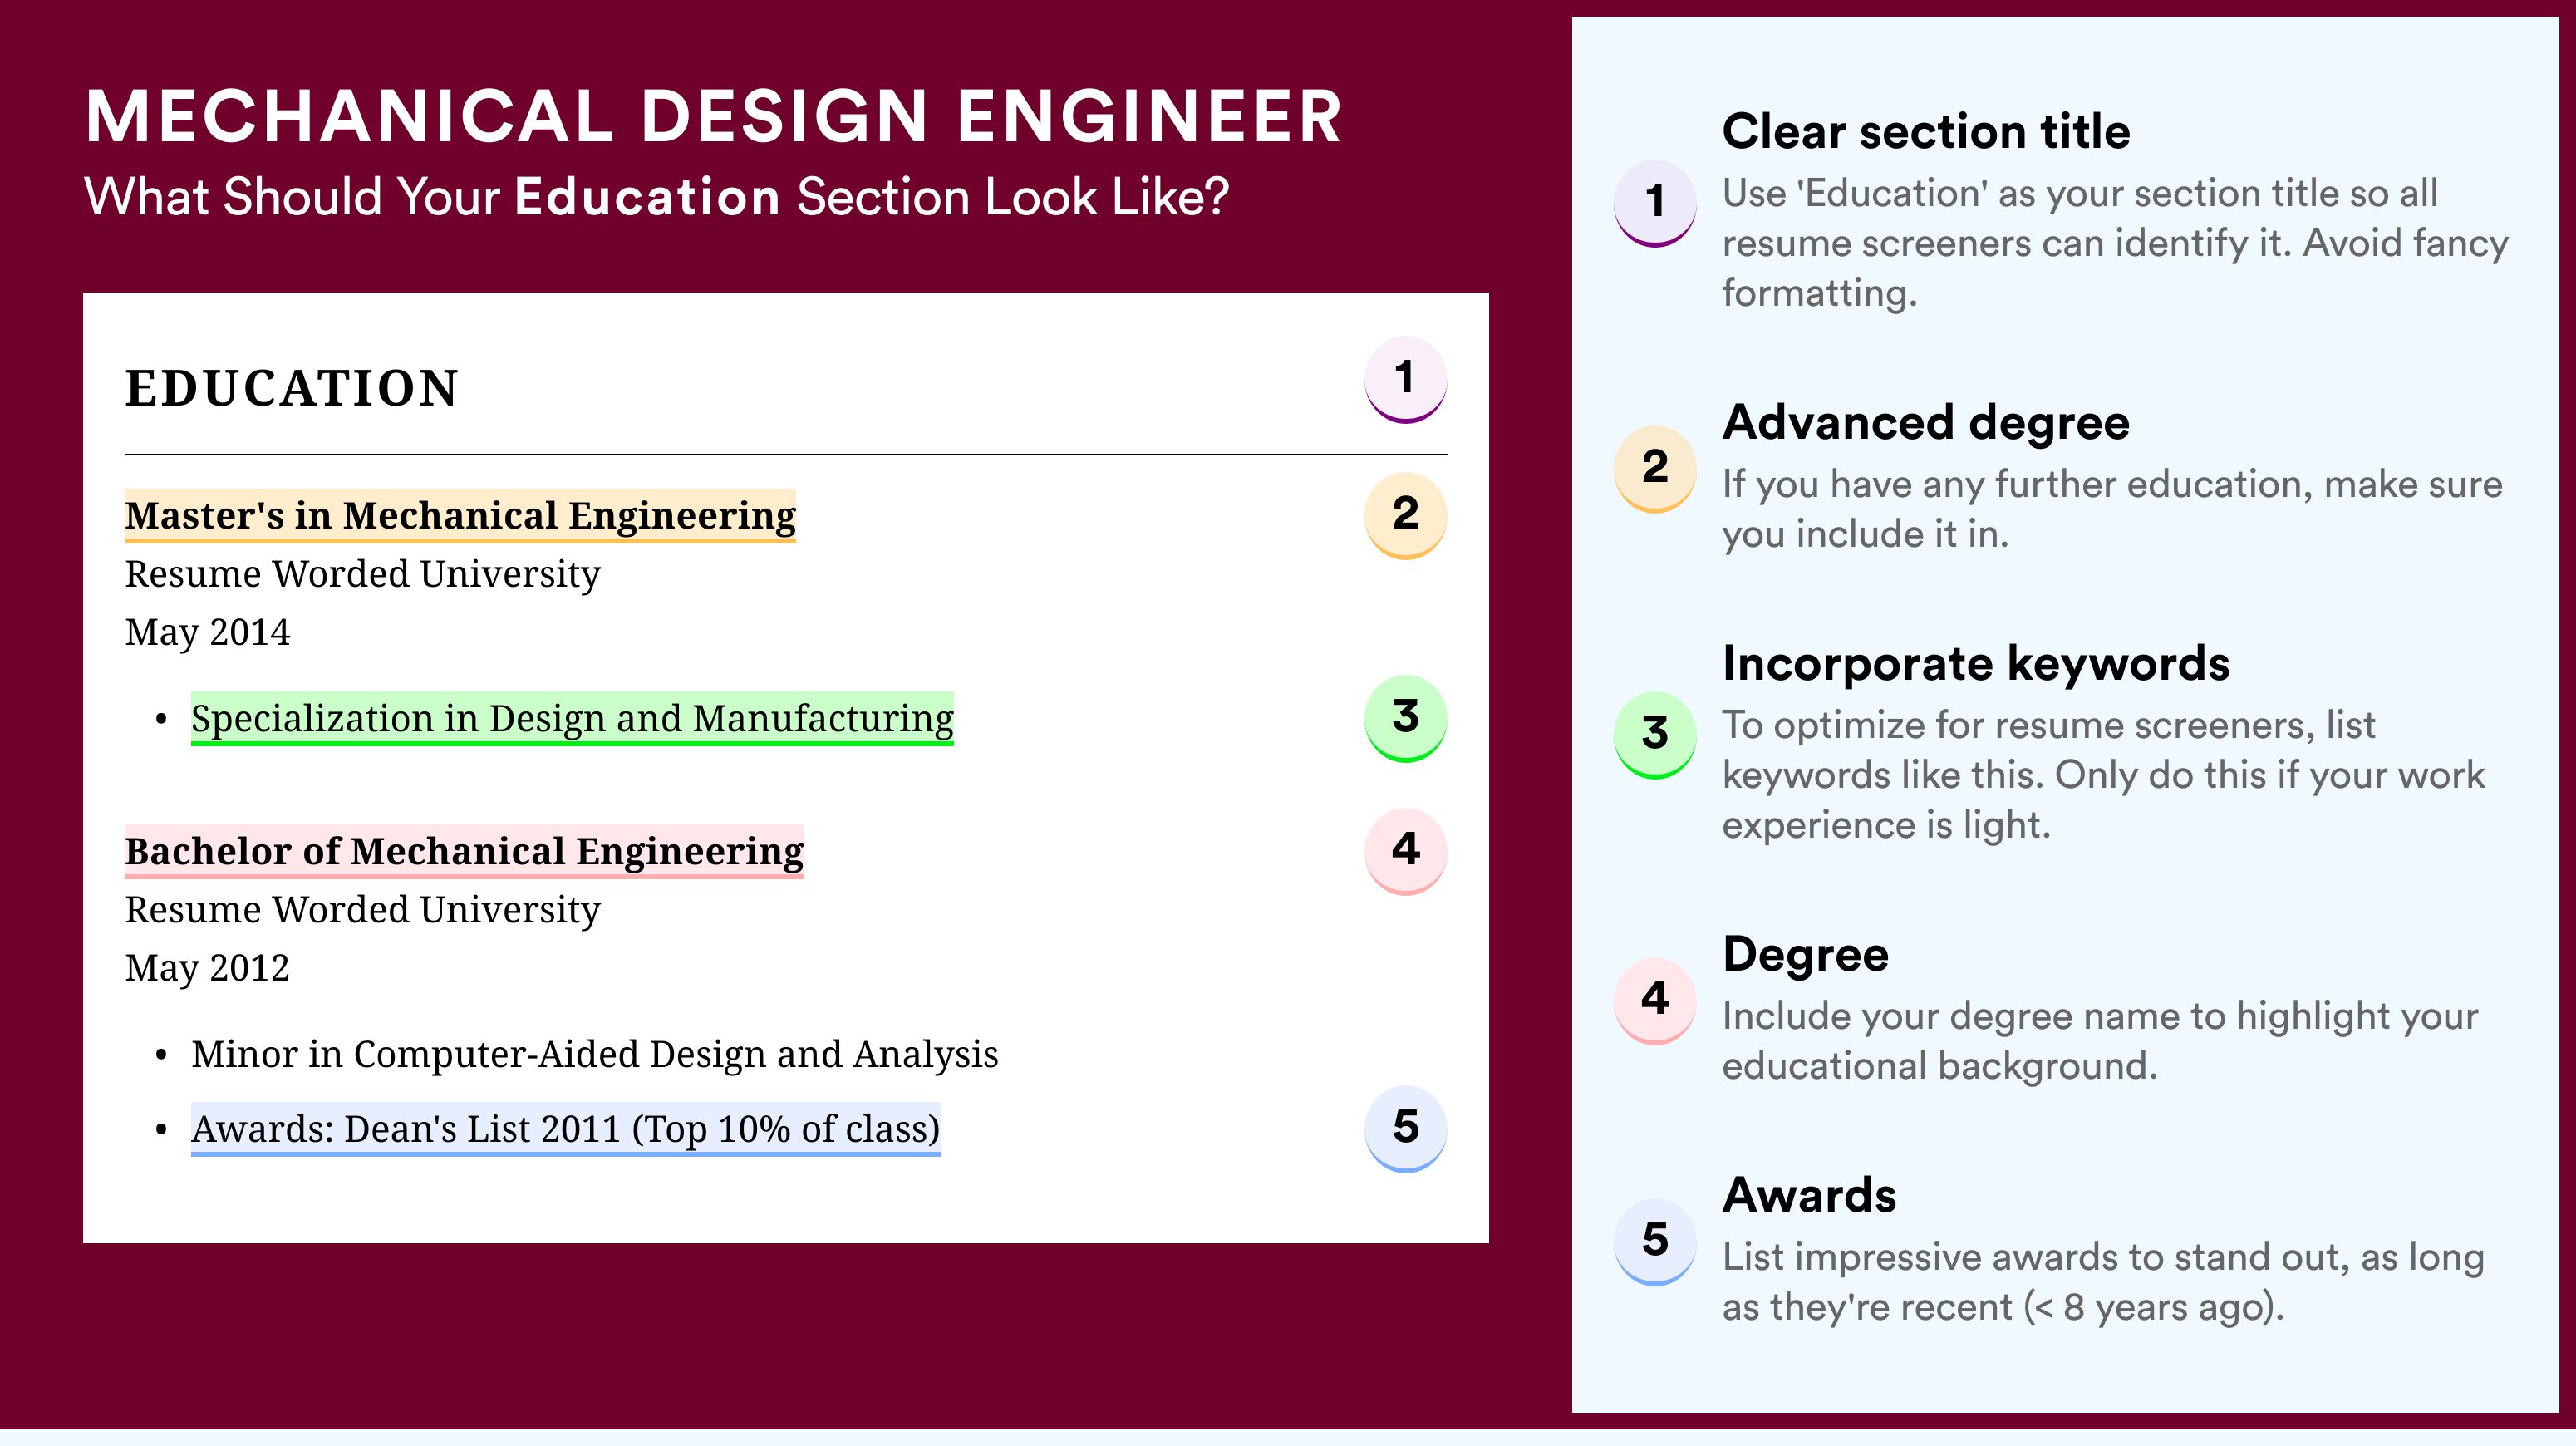 How To Write An Education Section - Mechanical Design Engineer Roles